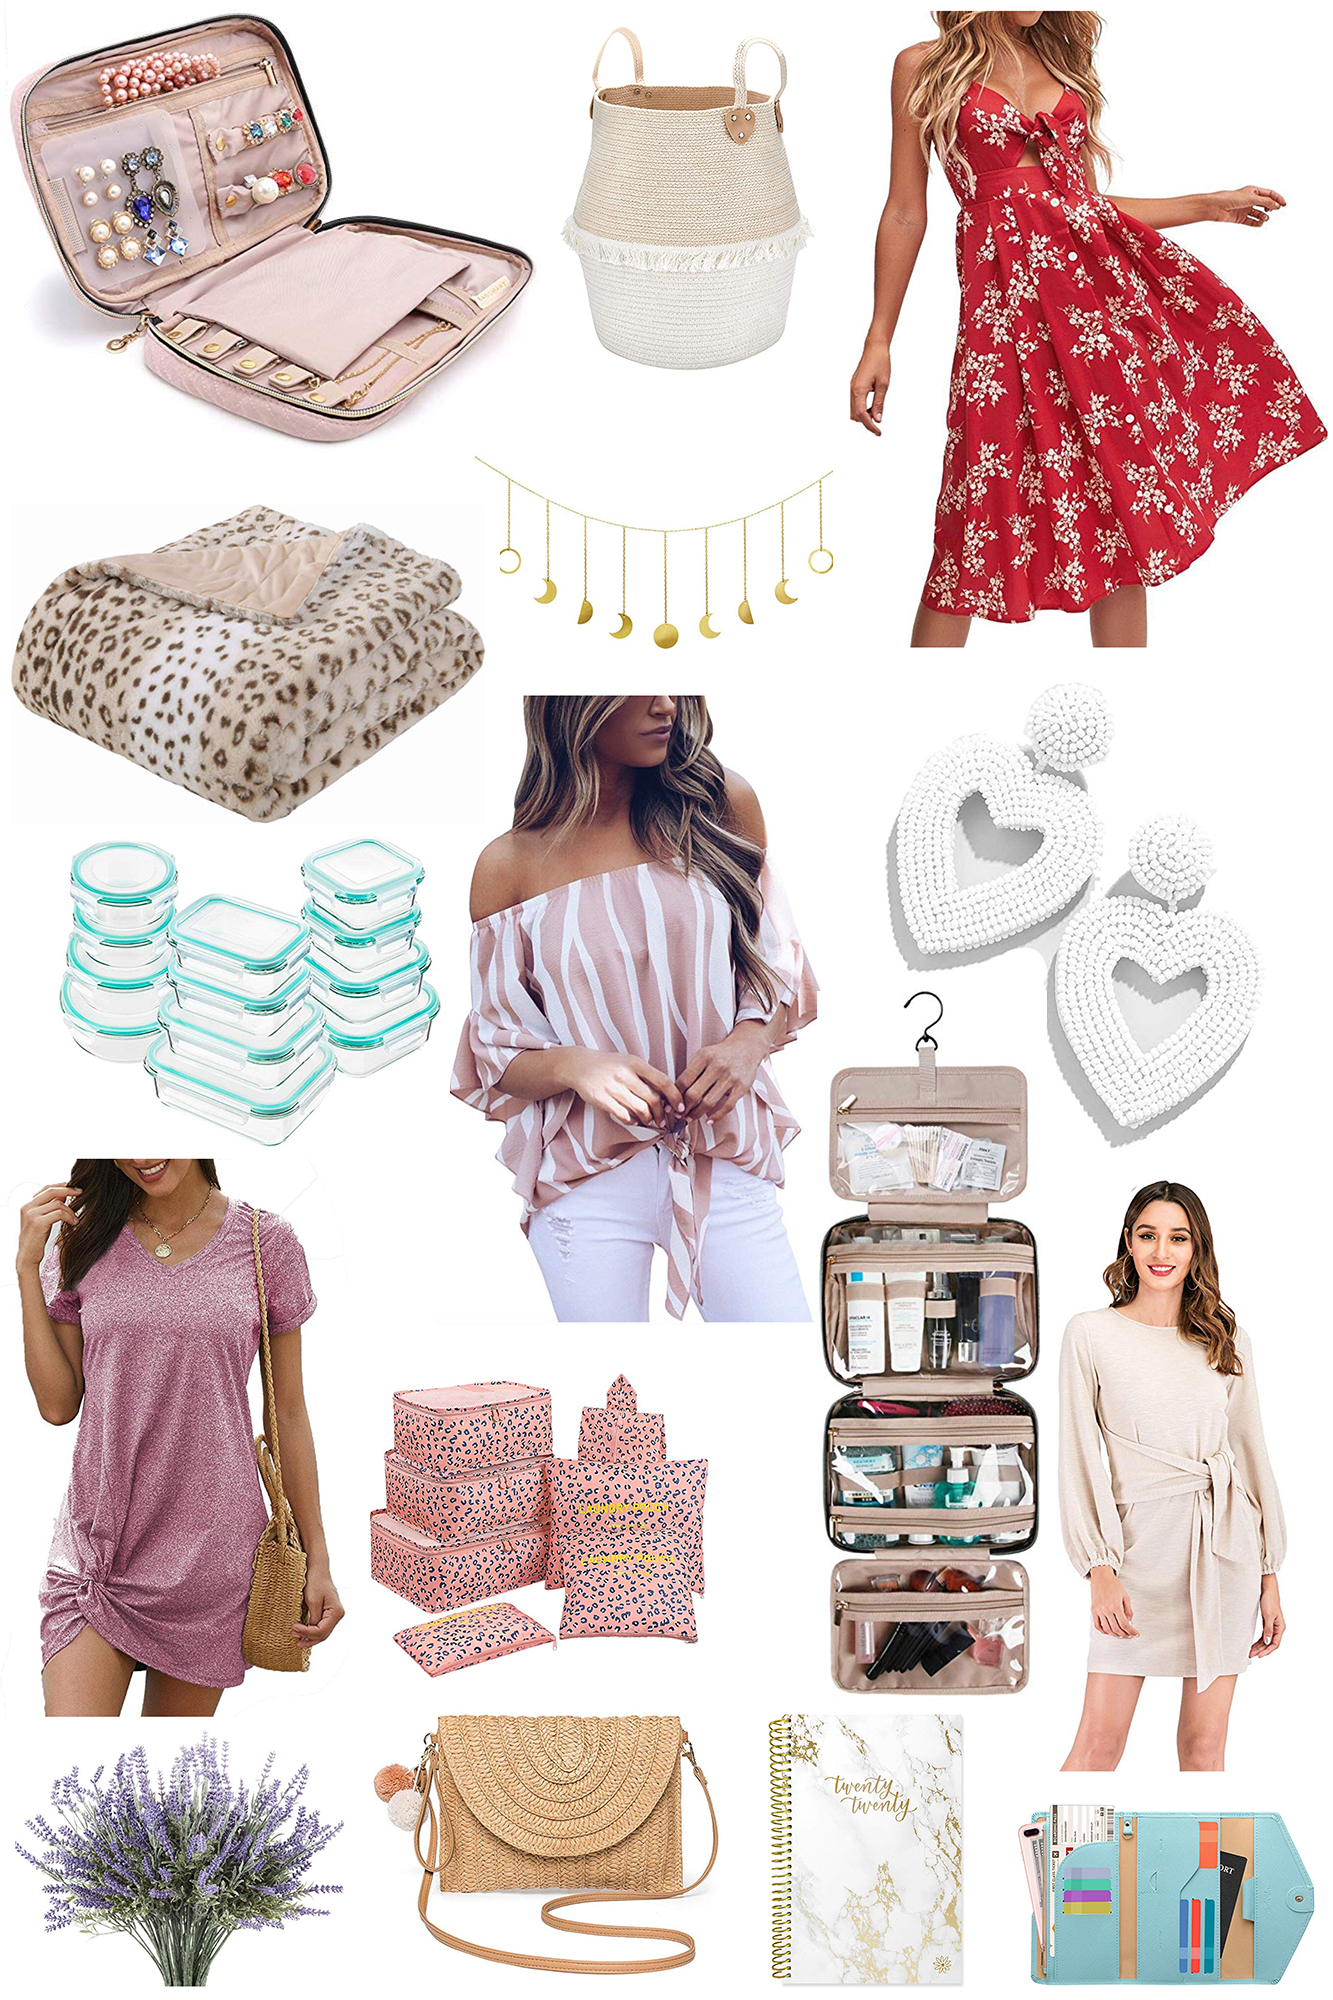 Favorite Amazon Finds February 2020 - SO many cute fashion, organization, healthy, and travel items that are all prime-able. 